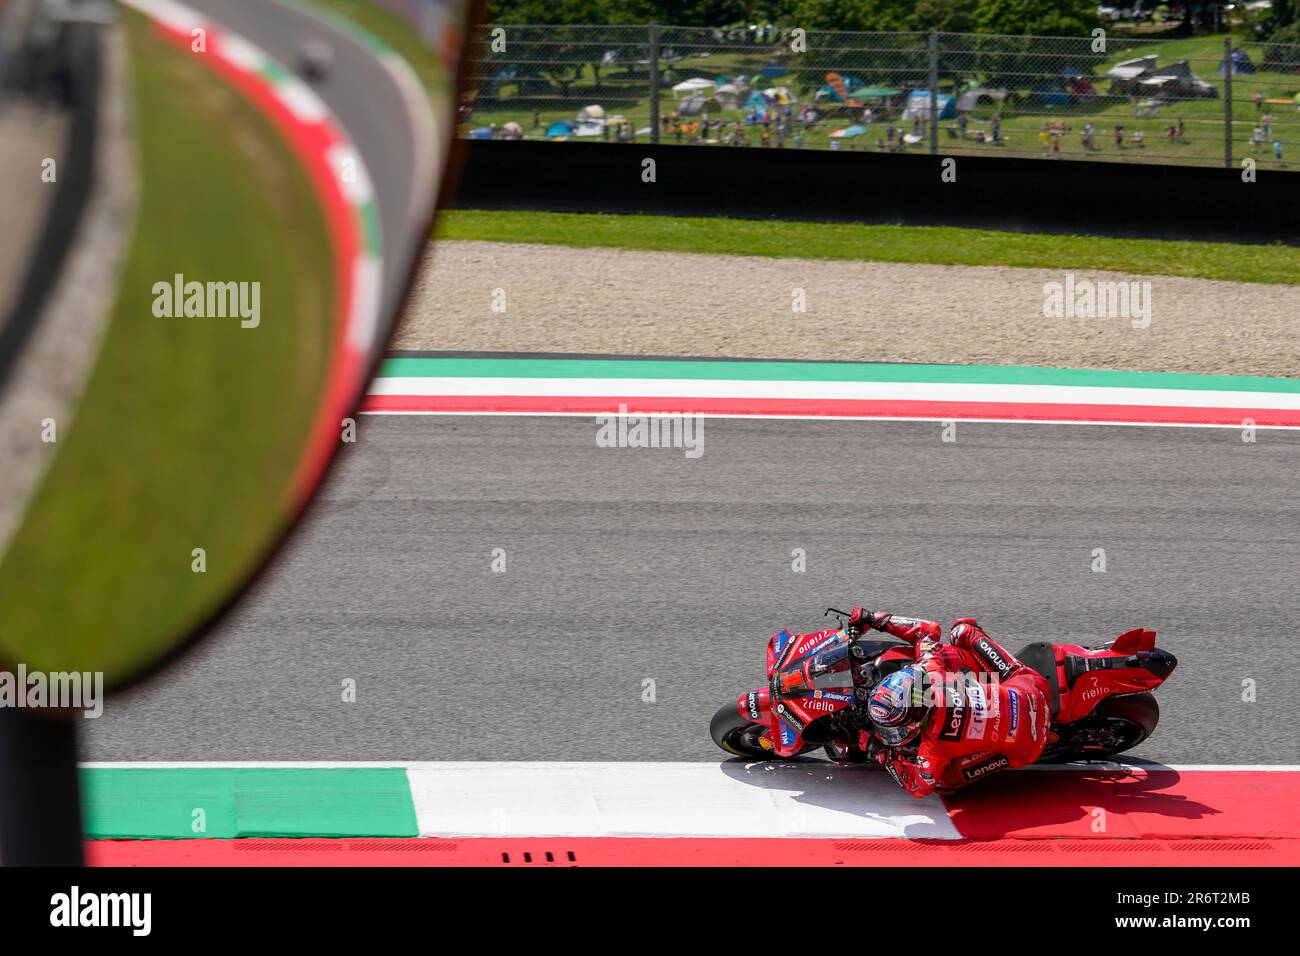 Italian rider Francesco Bagnaia of the Ducati Lenovo Team steers his motorcycle during the MotoGP race of the Grand Prix of Italy at the Mugello circuit in Scarperia, Italy, Sunday, June 11,